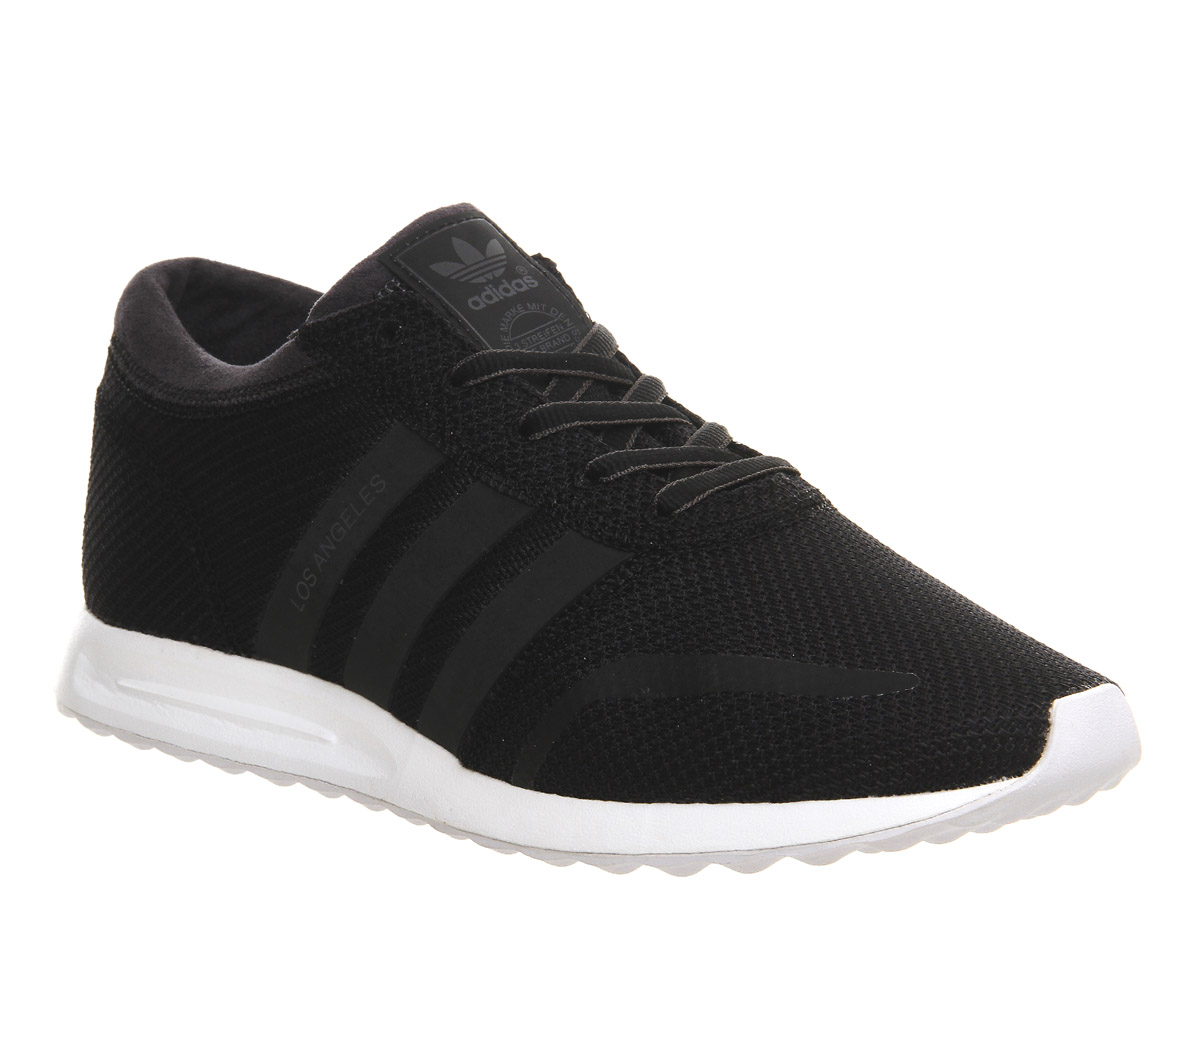 Adidas Los Angeles White And Black Outlet, SAVE 49% - primera-ap.com